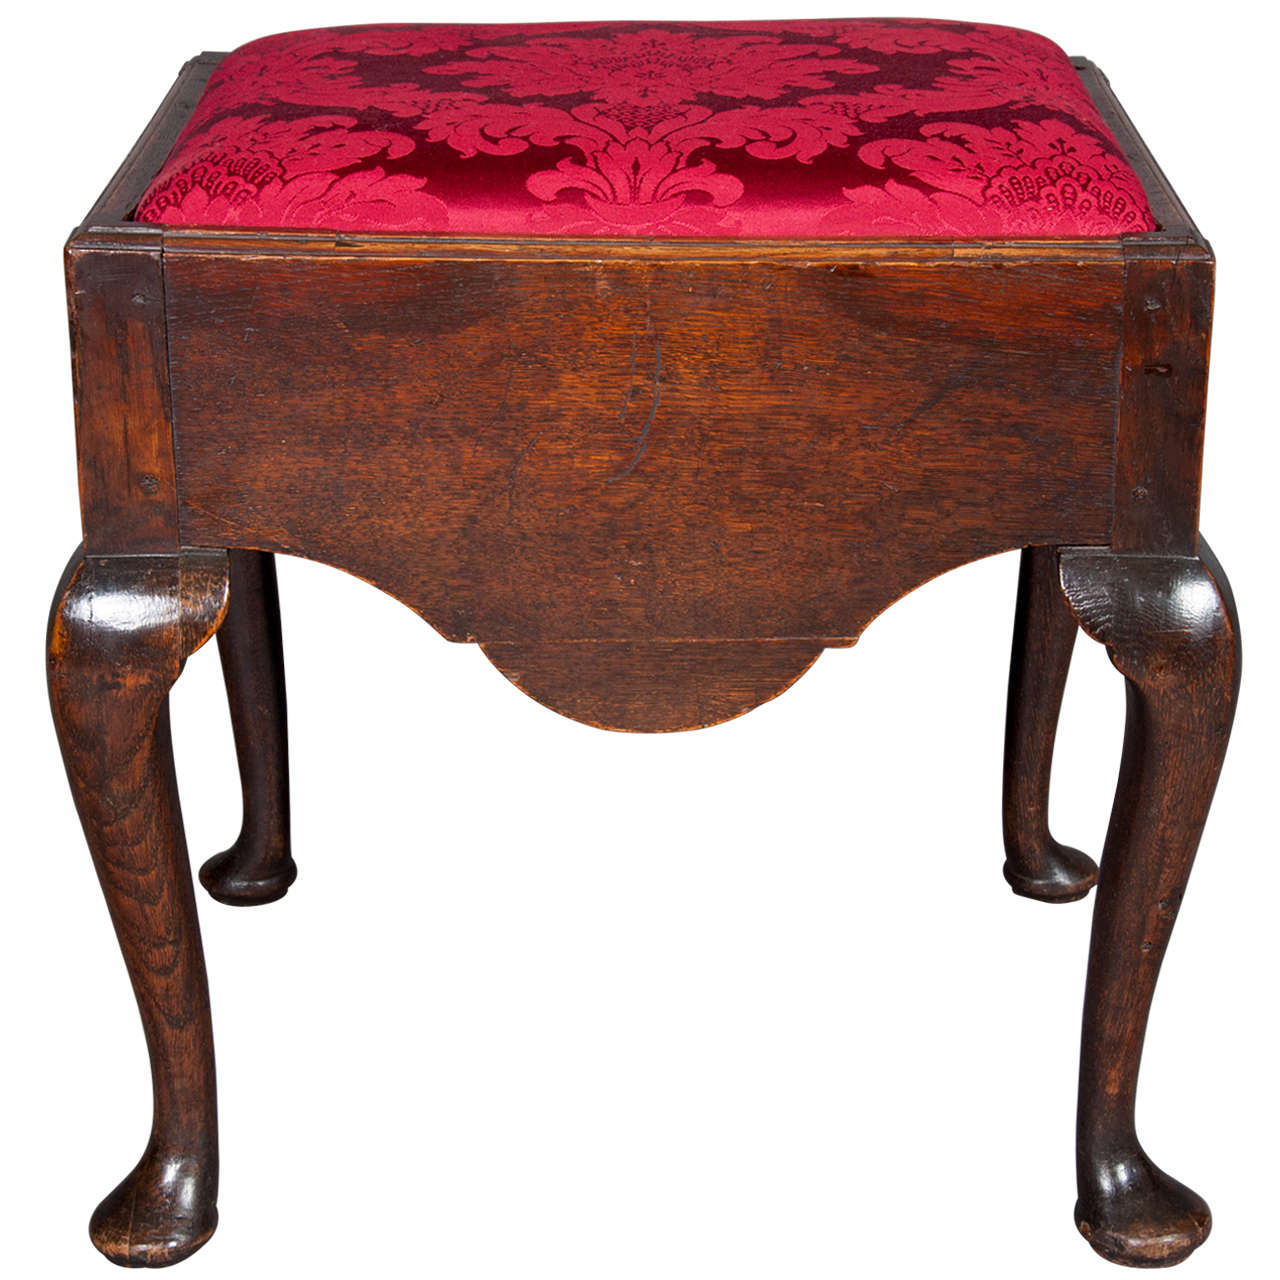 Mid-18th Century Oak Dressing Stool with red damask covered drop-in seat